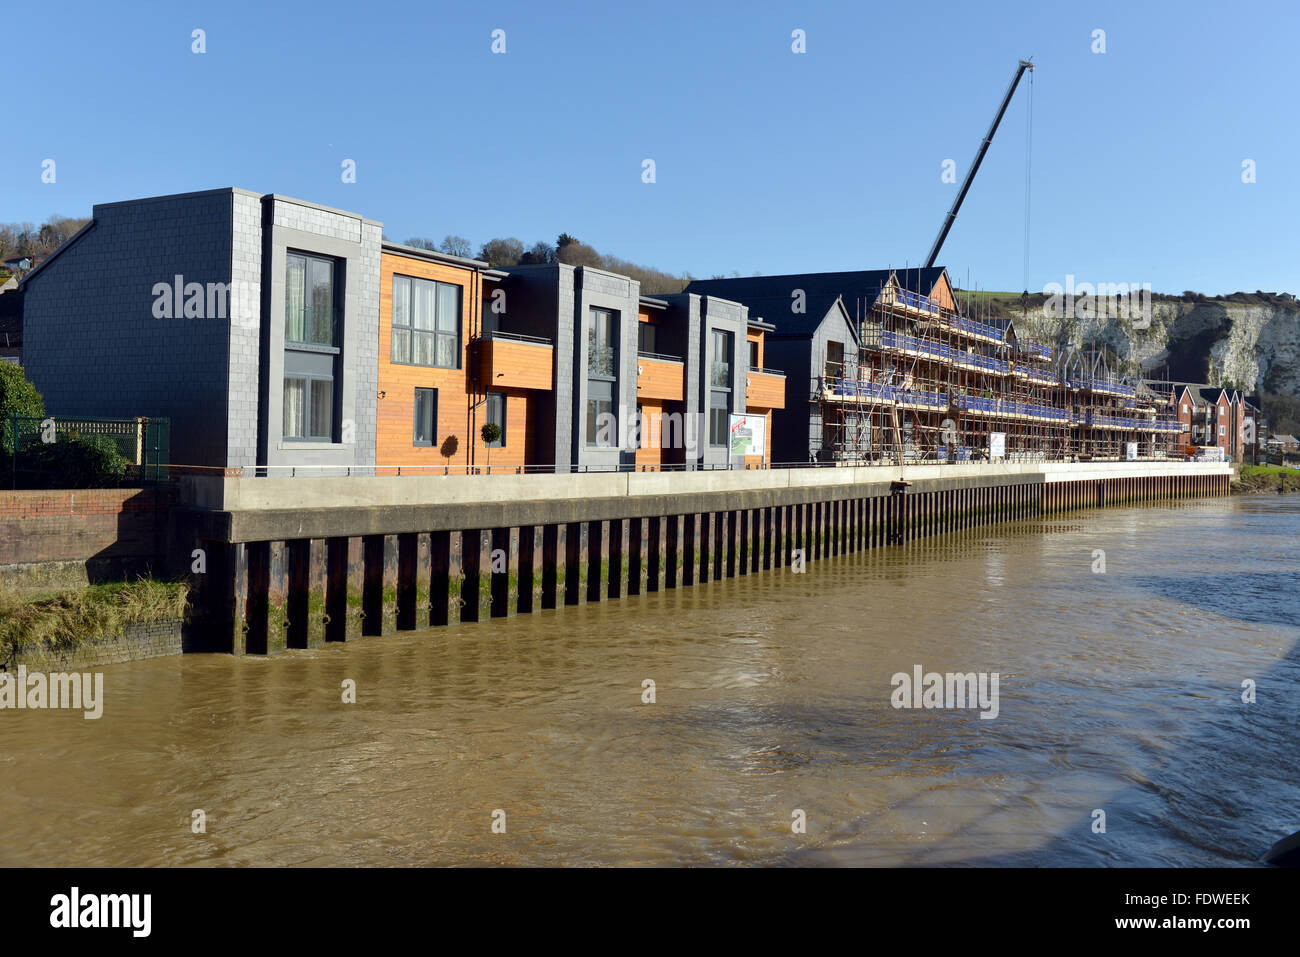 Waterfront houses being built on floodplain in Lewes UK Stock Photo